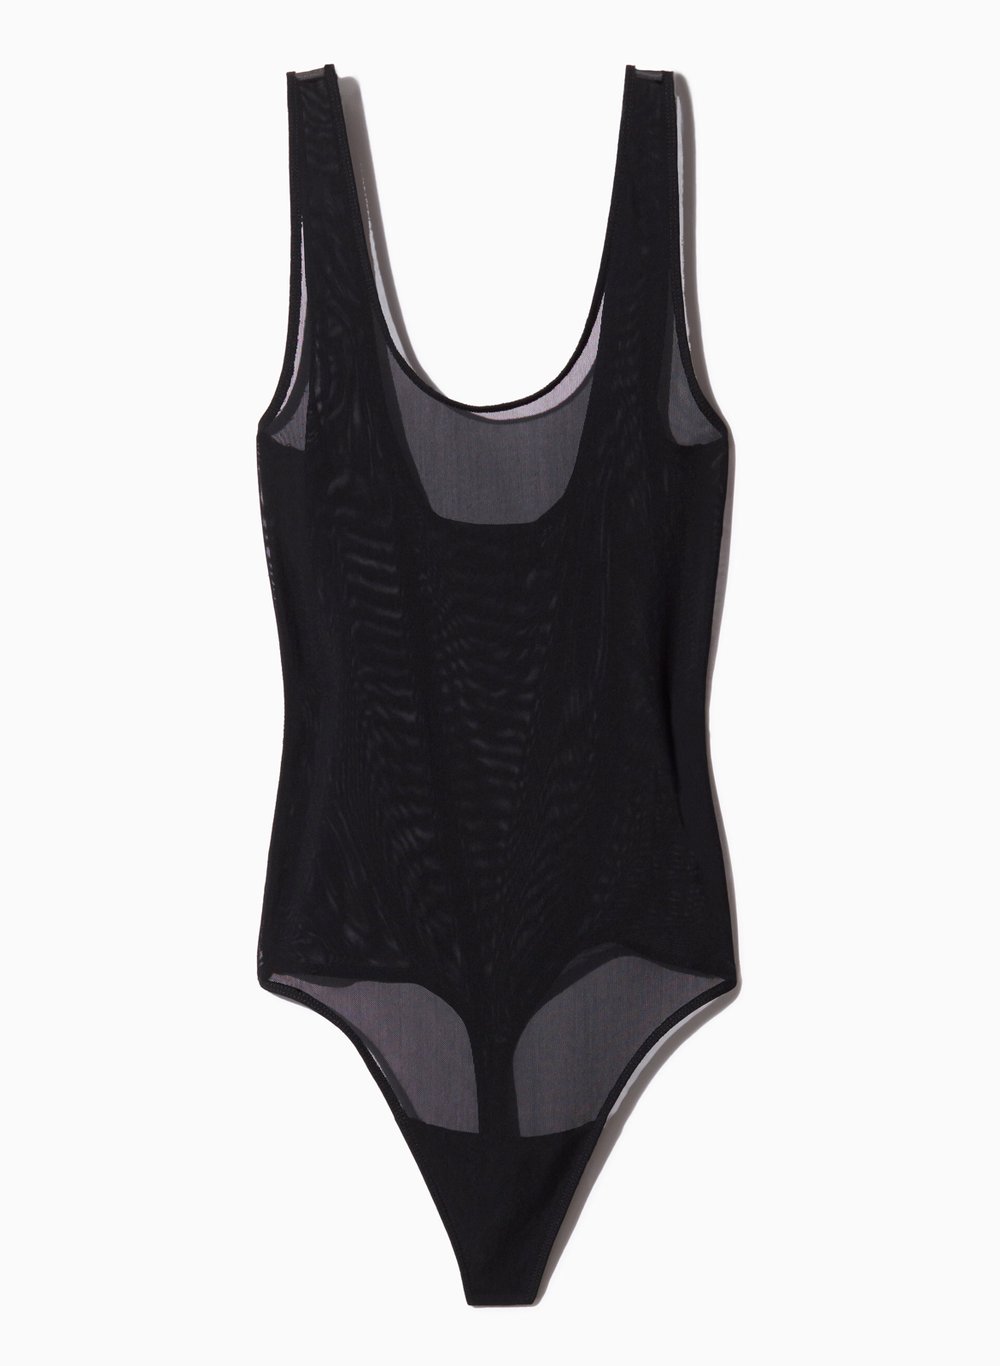 Image of Sheer Intentions Body suit